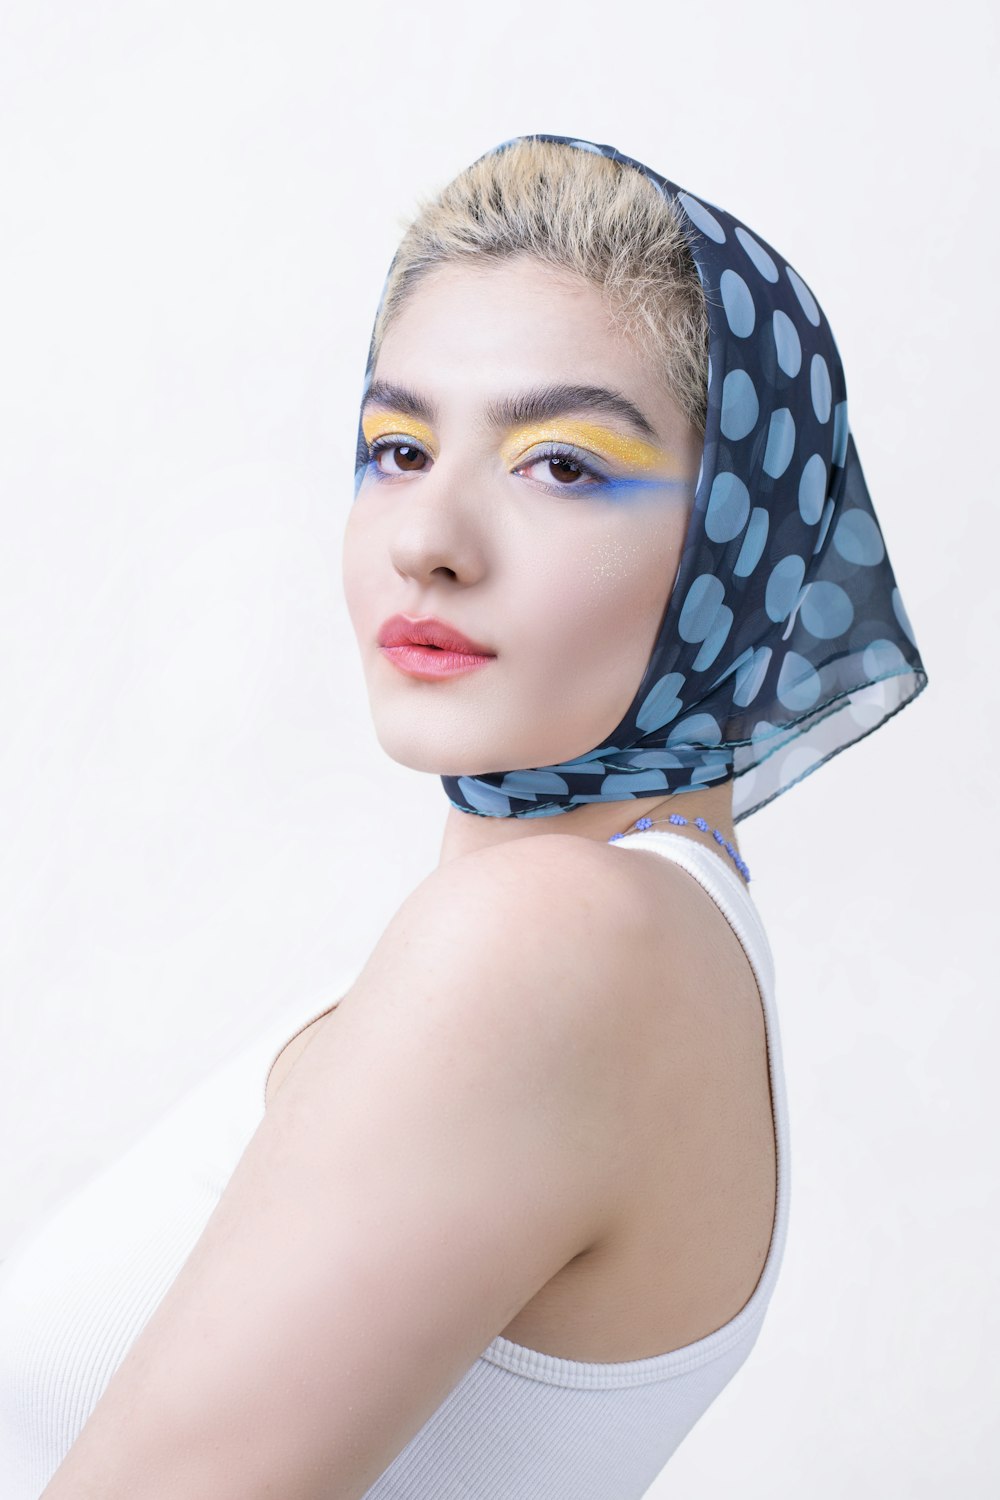 a woman with blue and white makeup and a veil on her head